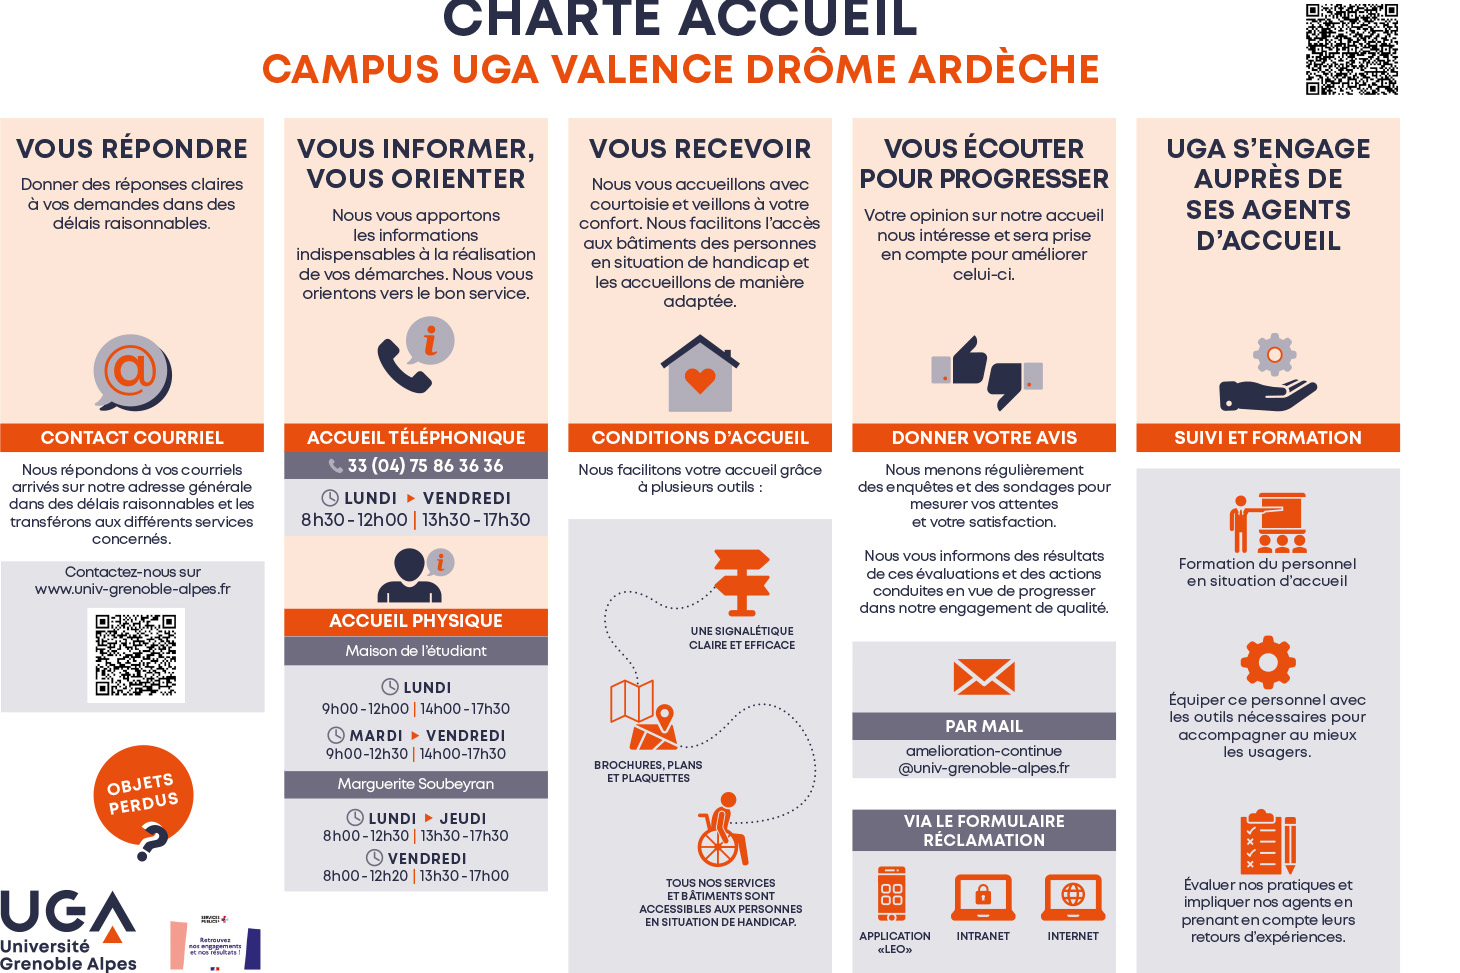 Charte accueil Campus Valence